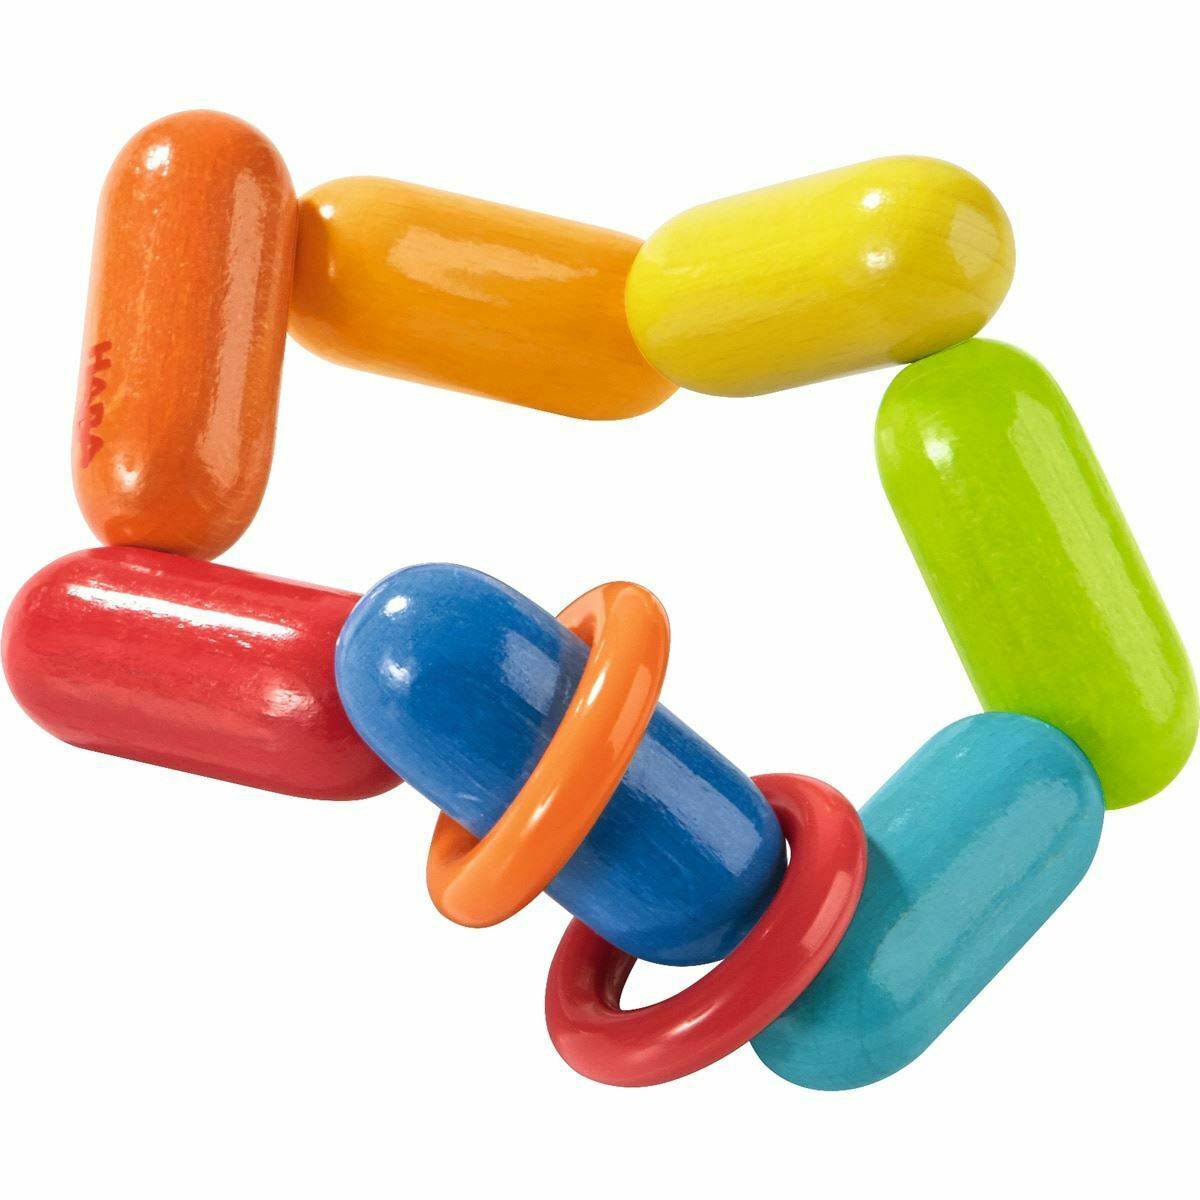 Dilly-Dally Wooden Rattle with Plastic Rings - HABA USA